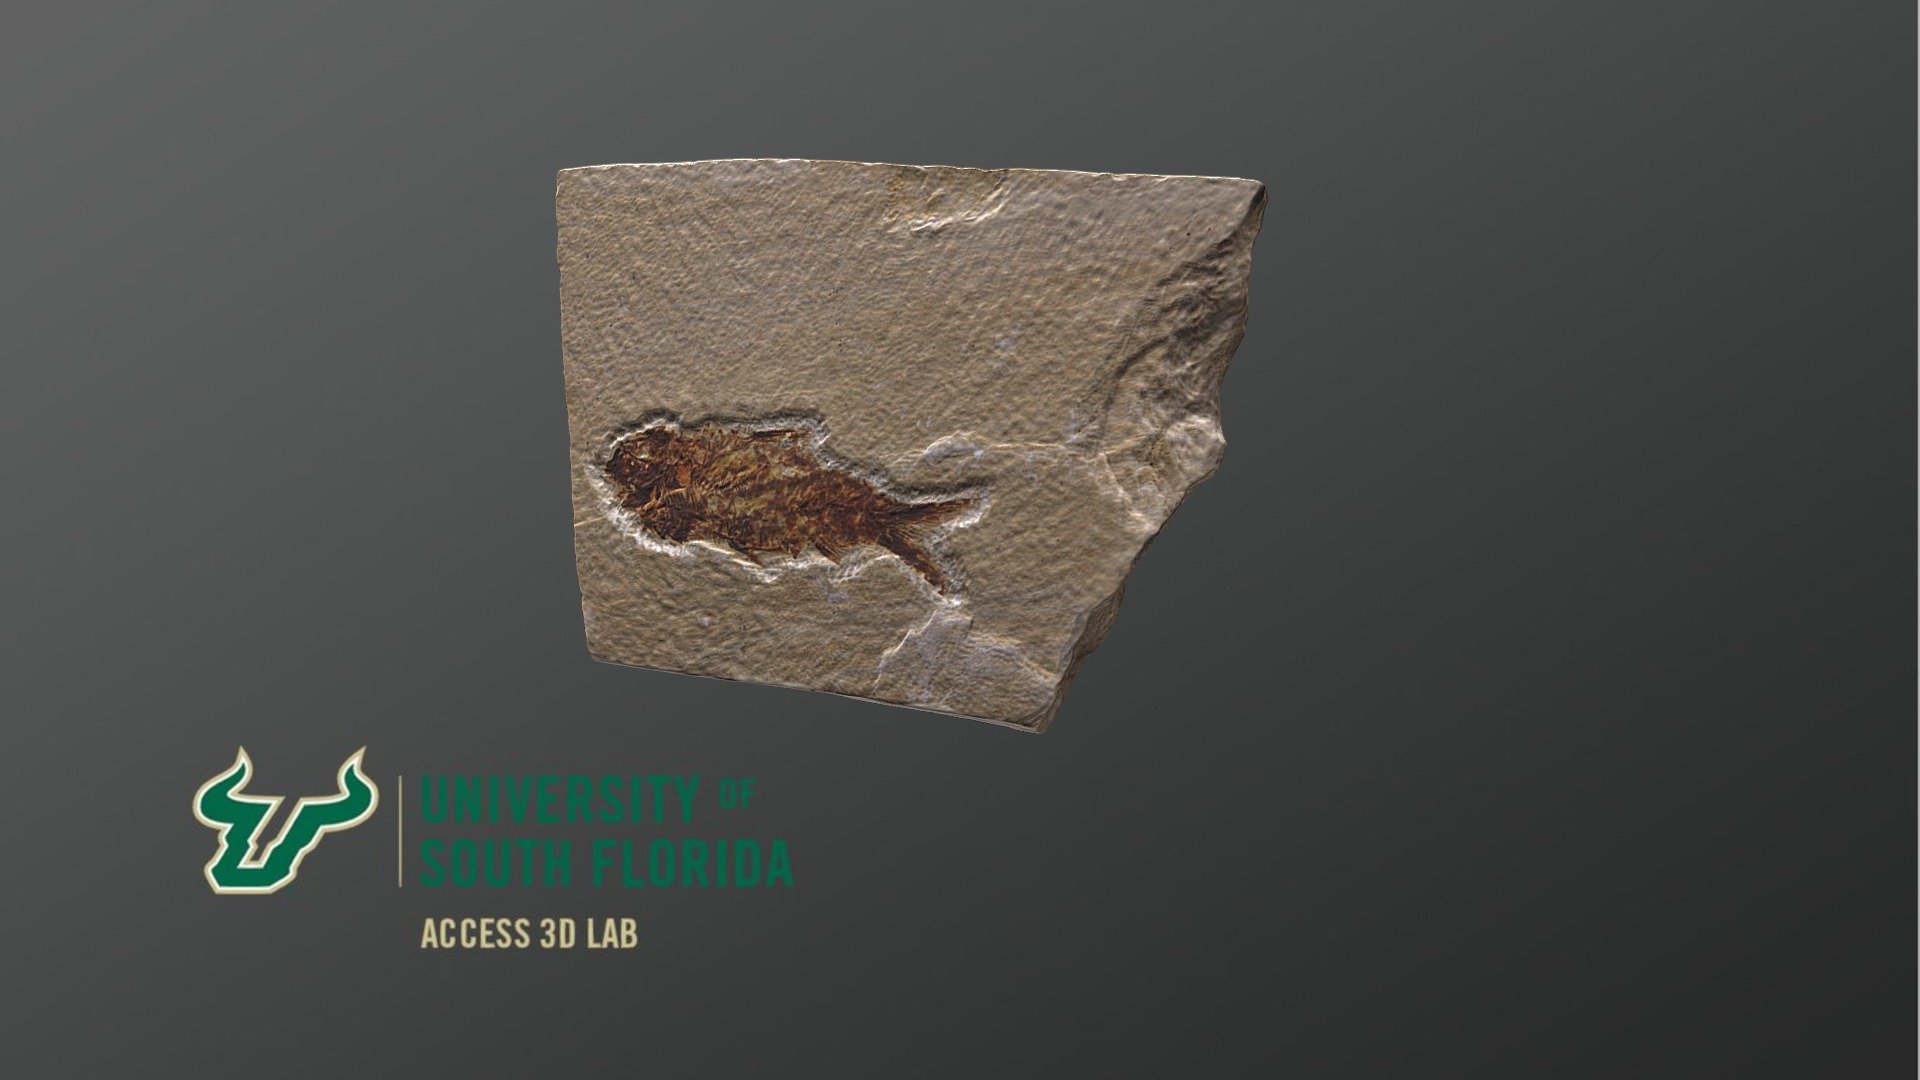 Fossilized Fish